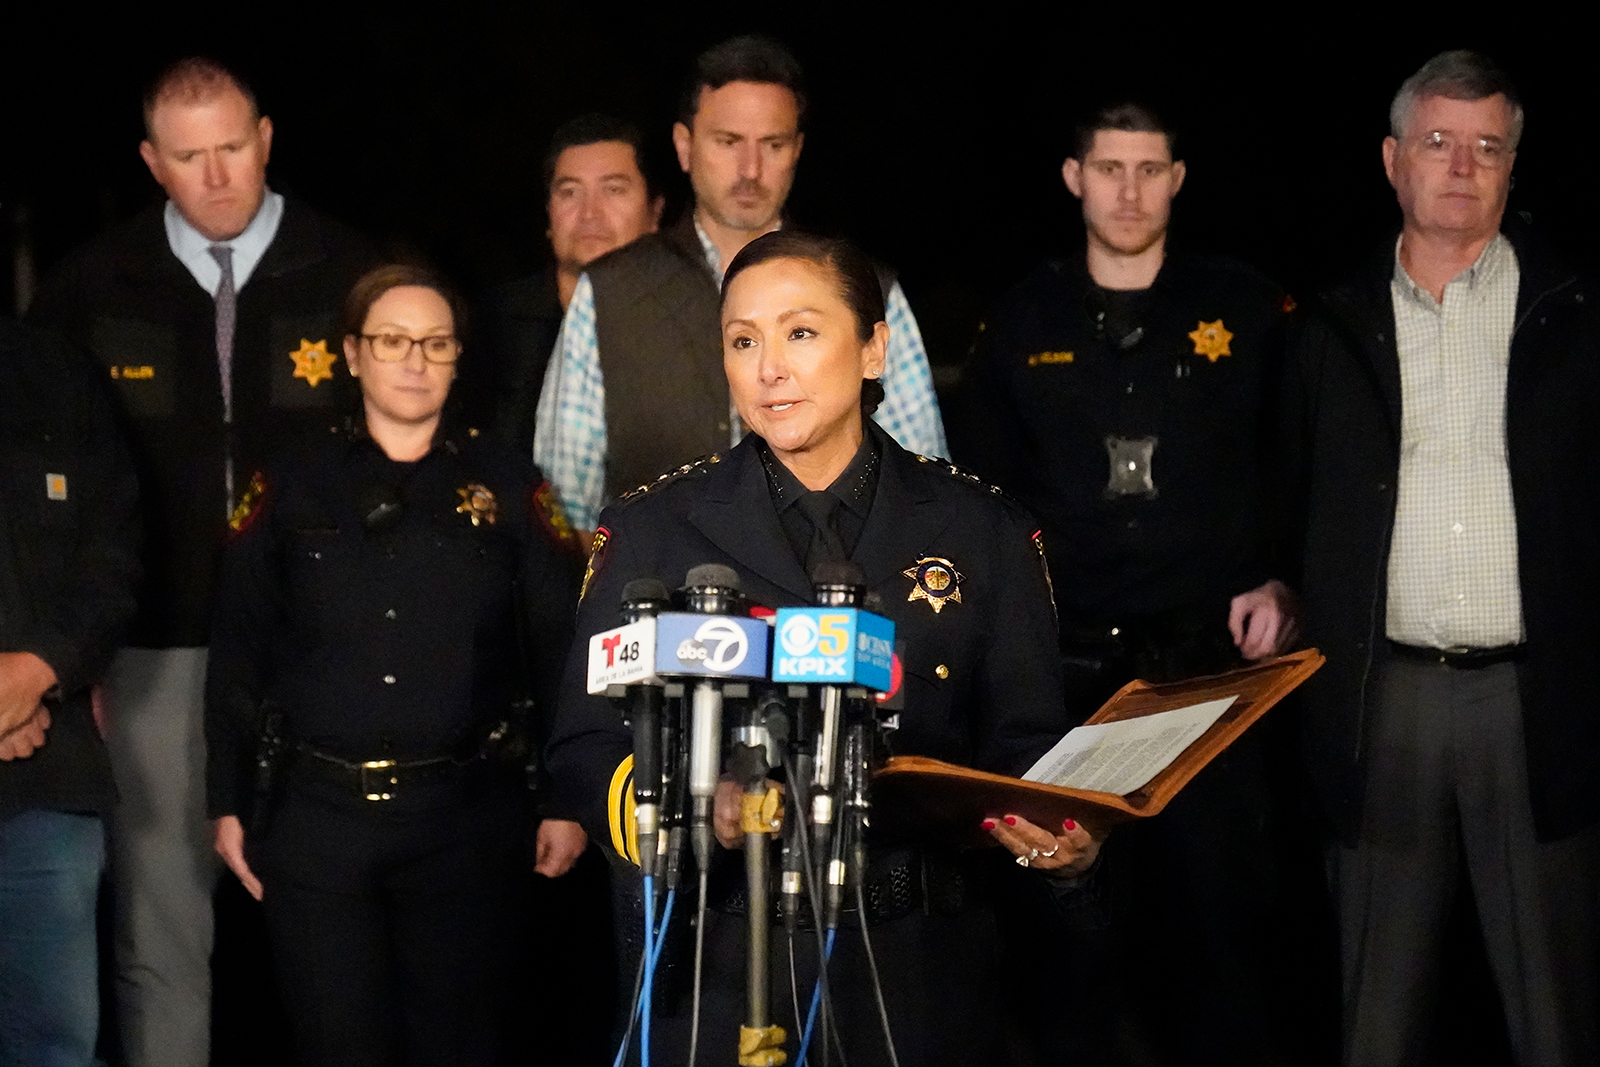 Christina Corpus speaks at a news conference in Half Moon Bay, California on January 24.